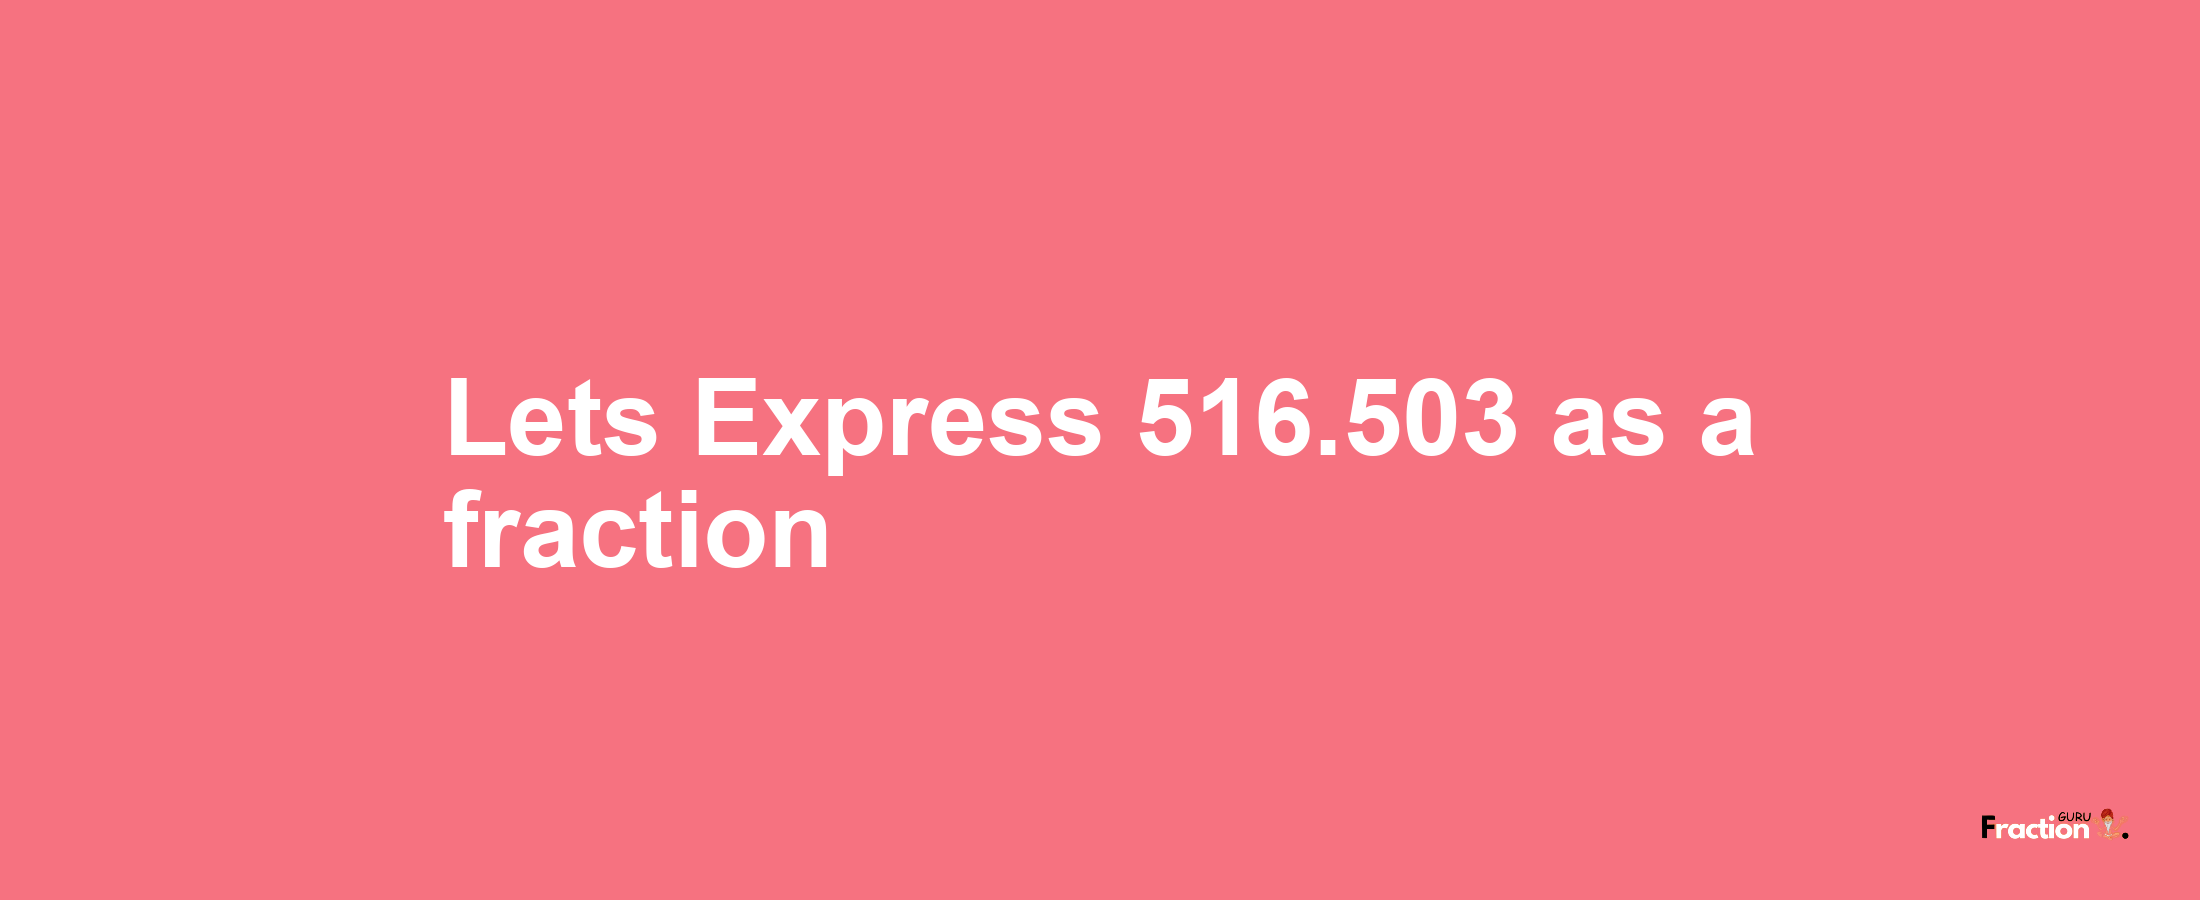 Lets Express 516.503 as afraction